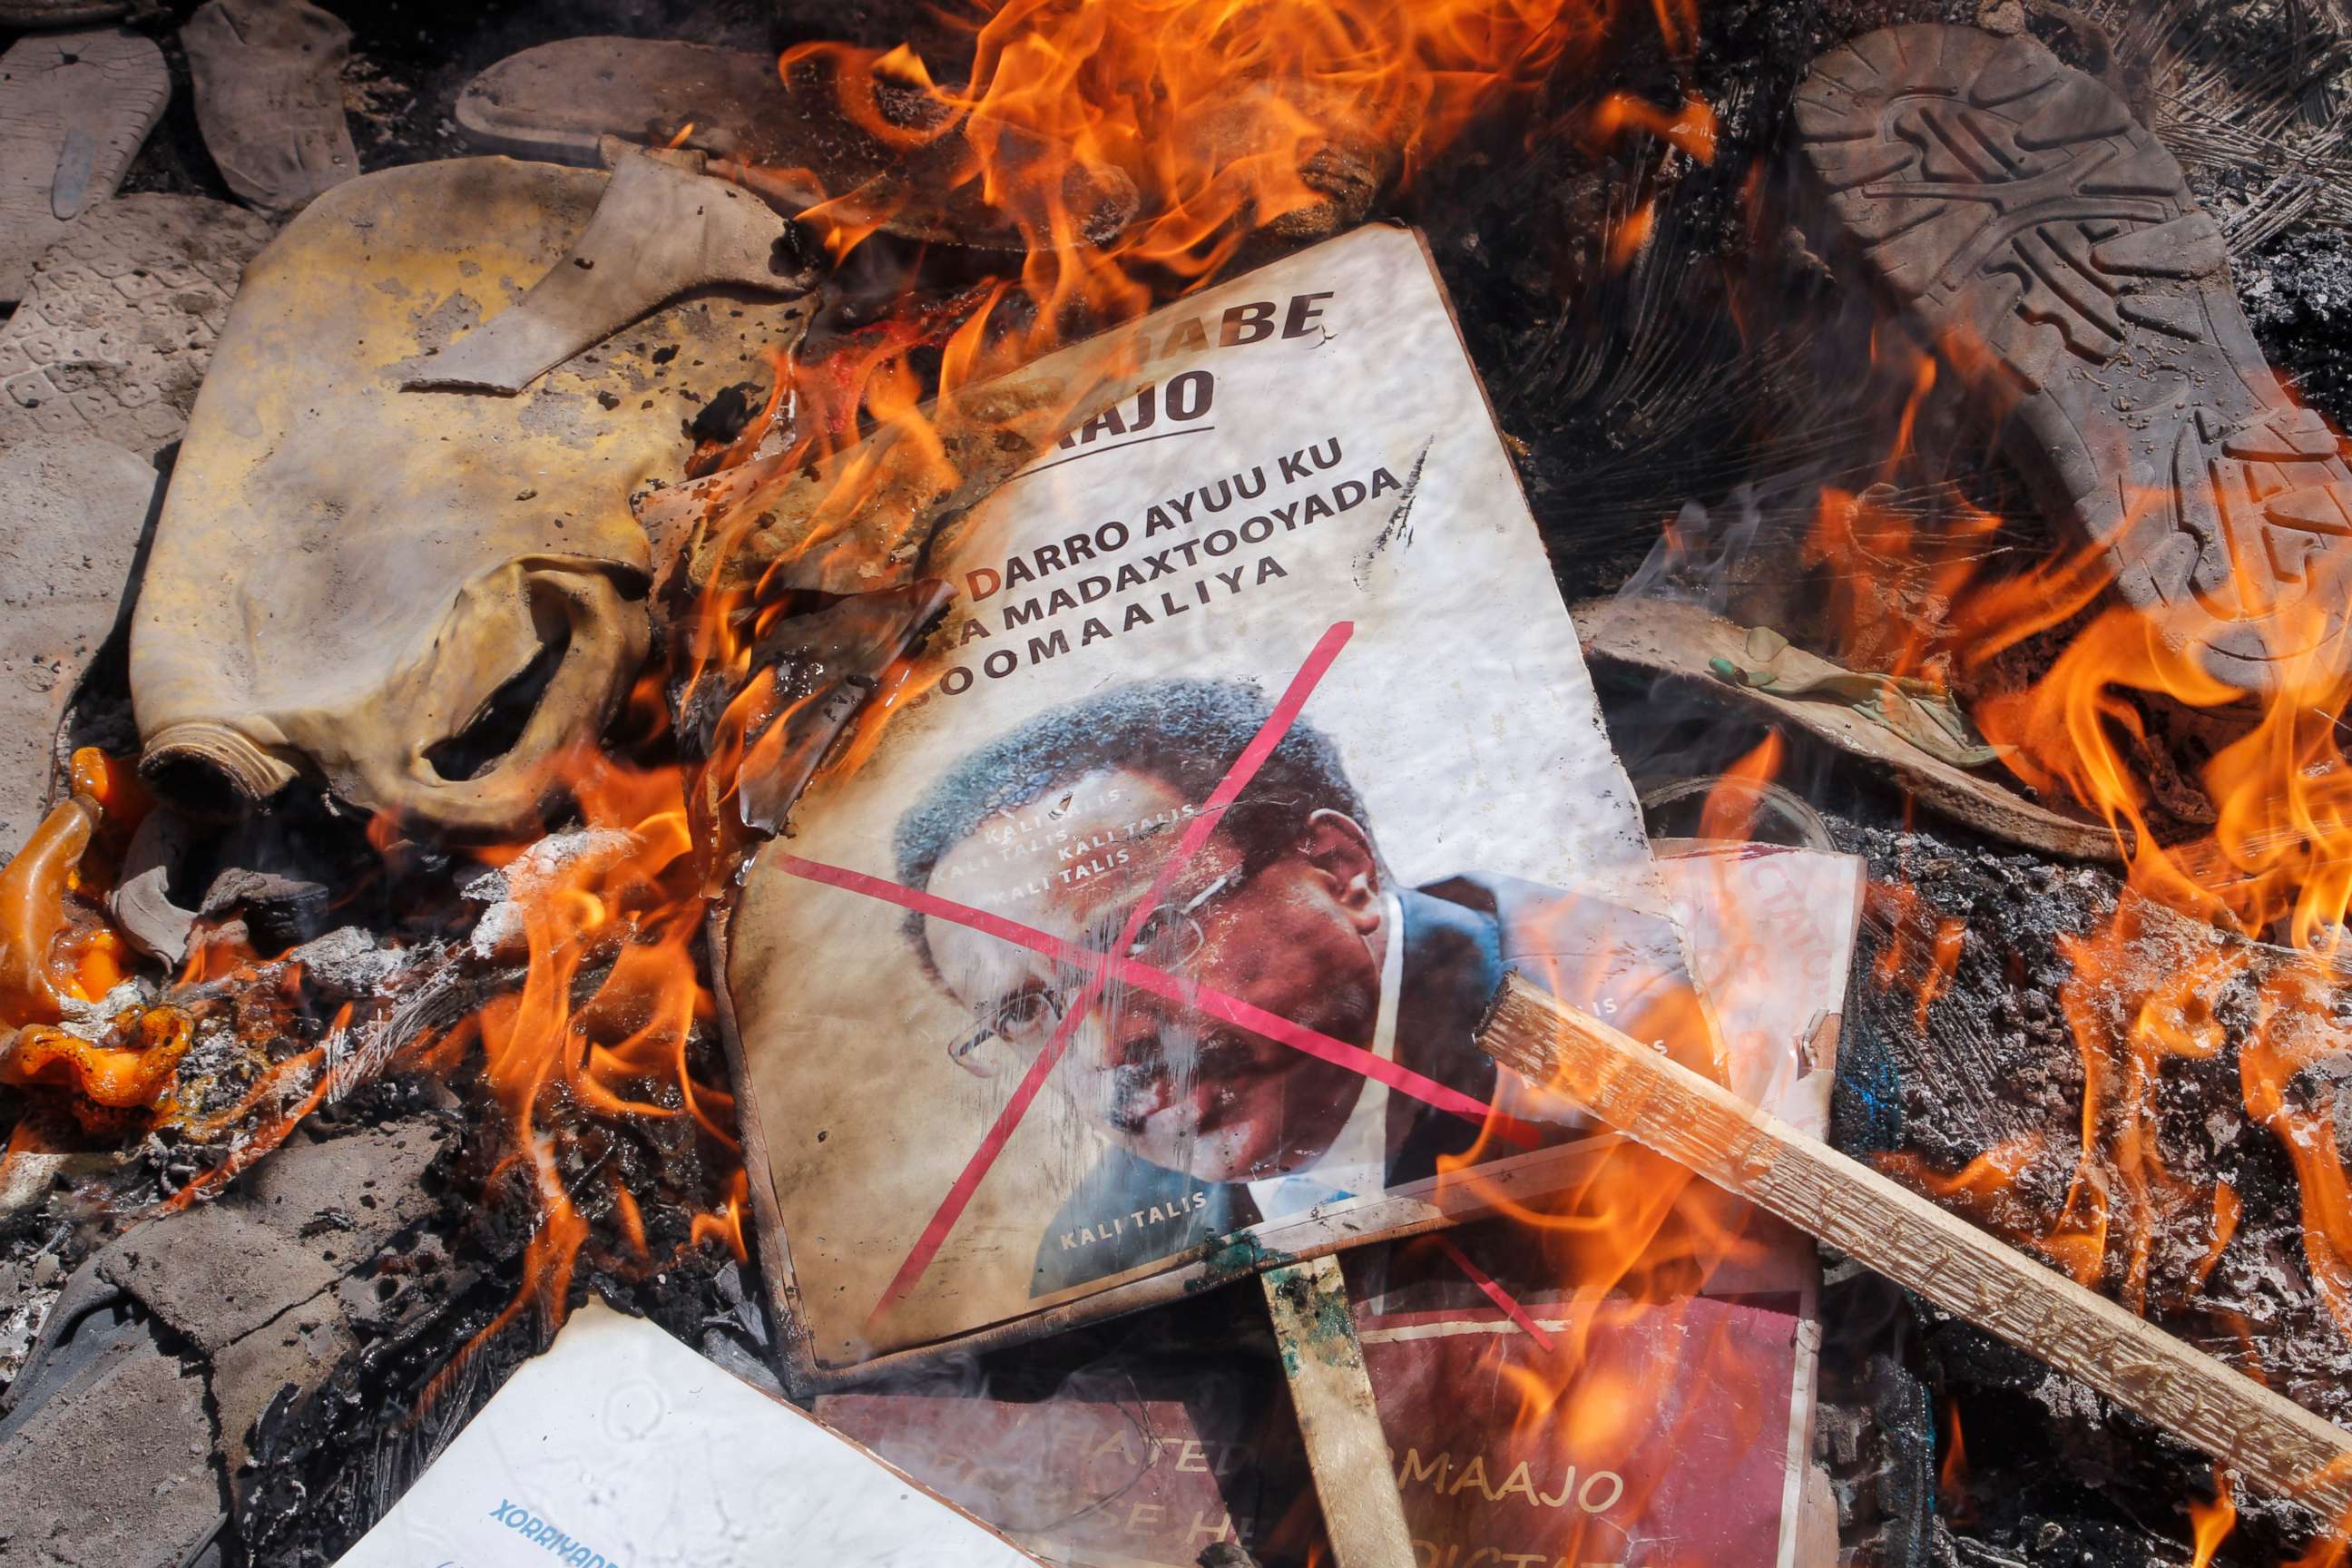 PHOTO: Demonstrators from Somali anti-government opposition groups burn photographs of the president in the Fagah area of Mogadishu, Somalia, on April 25, 2021.